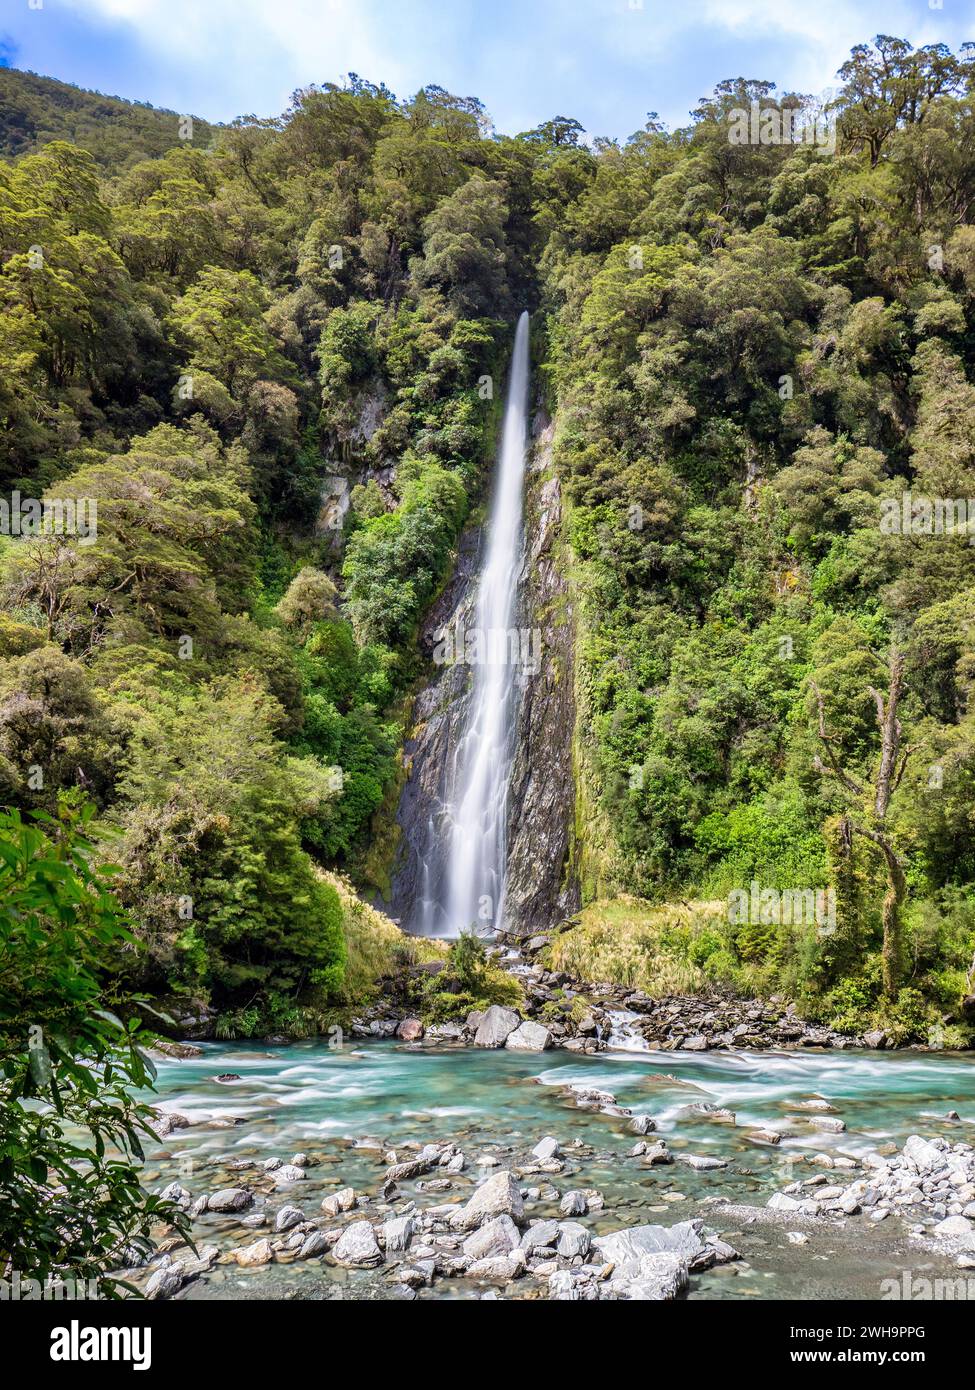 Thunder Creek Falls, running into the Haast River, in the West Coast Region of New Zealand. Stock Photo